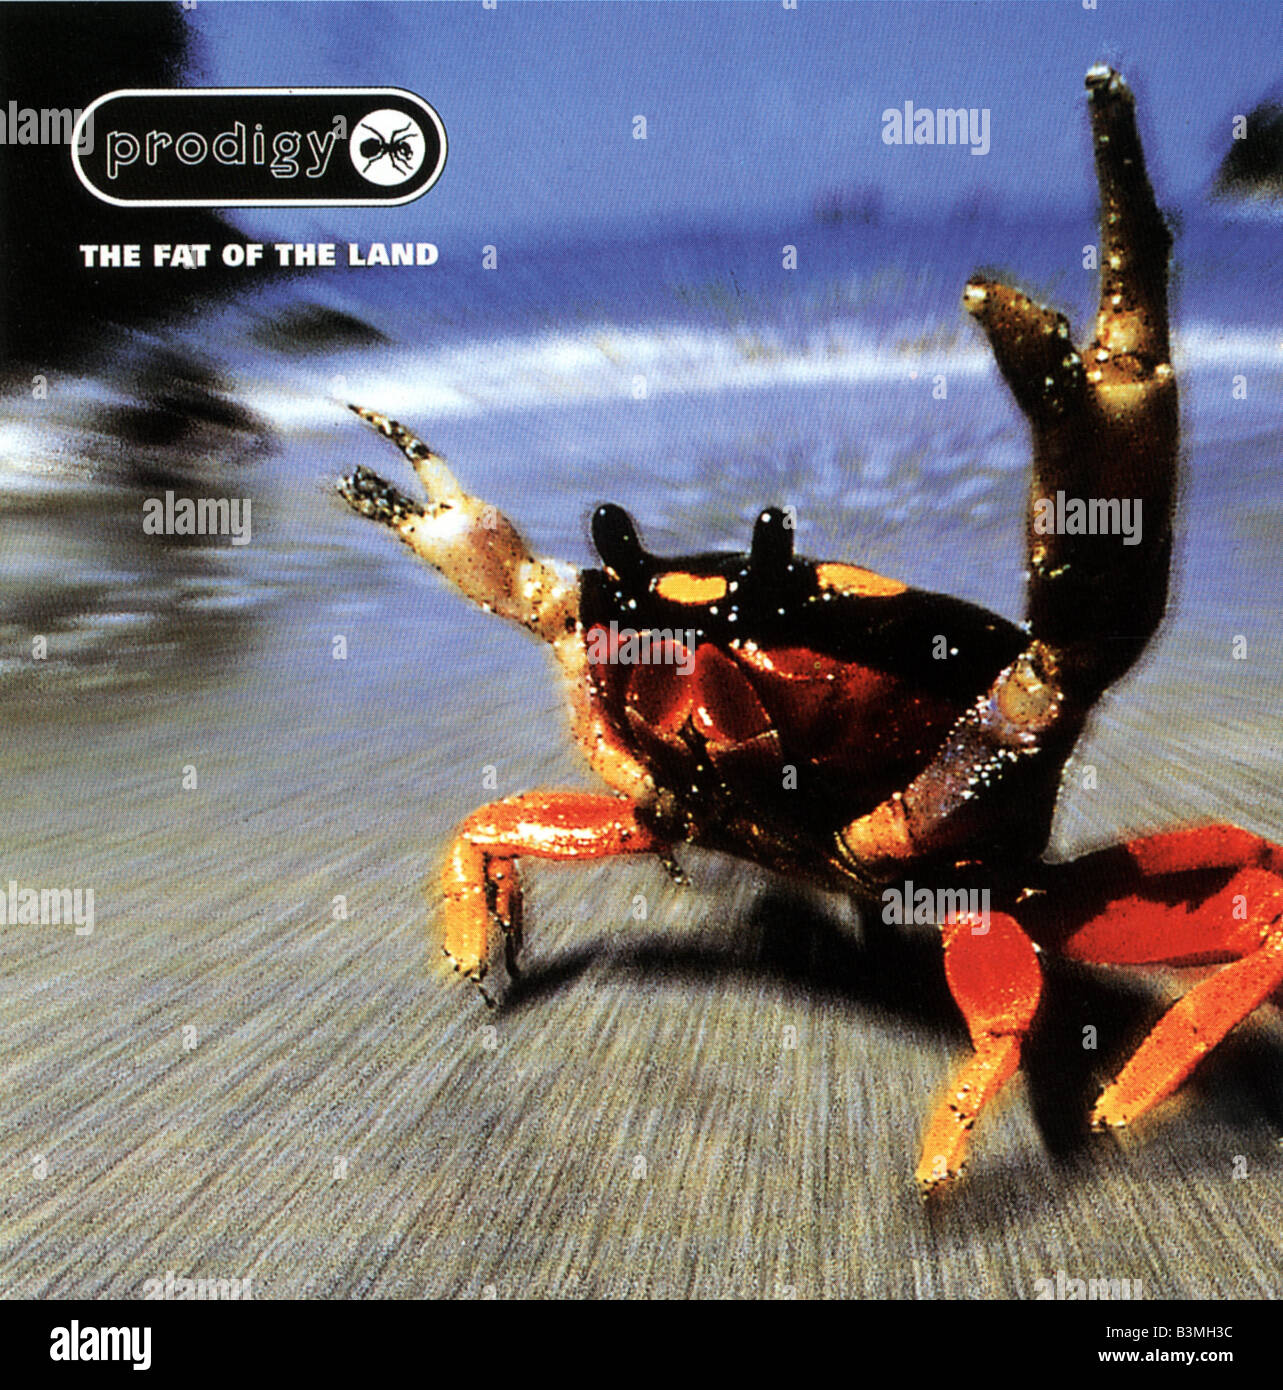 PRODIGY  UK rock group album cover The Fat of the Land  featuring a Sally Lightfoot crab Stock Photo